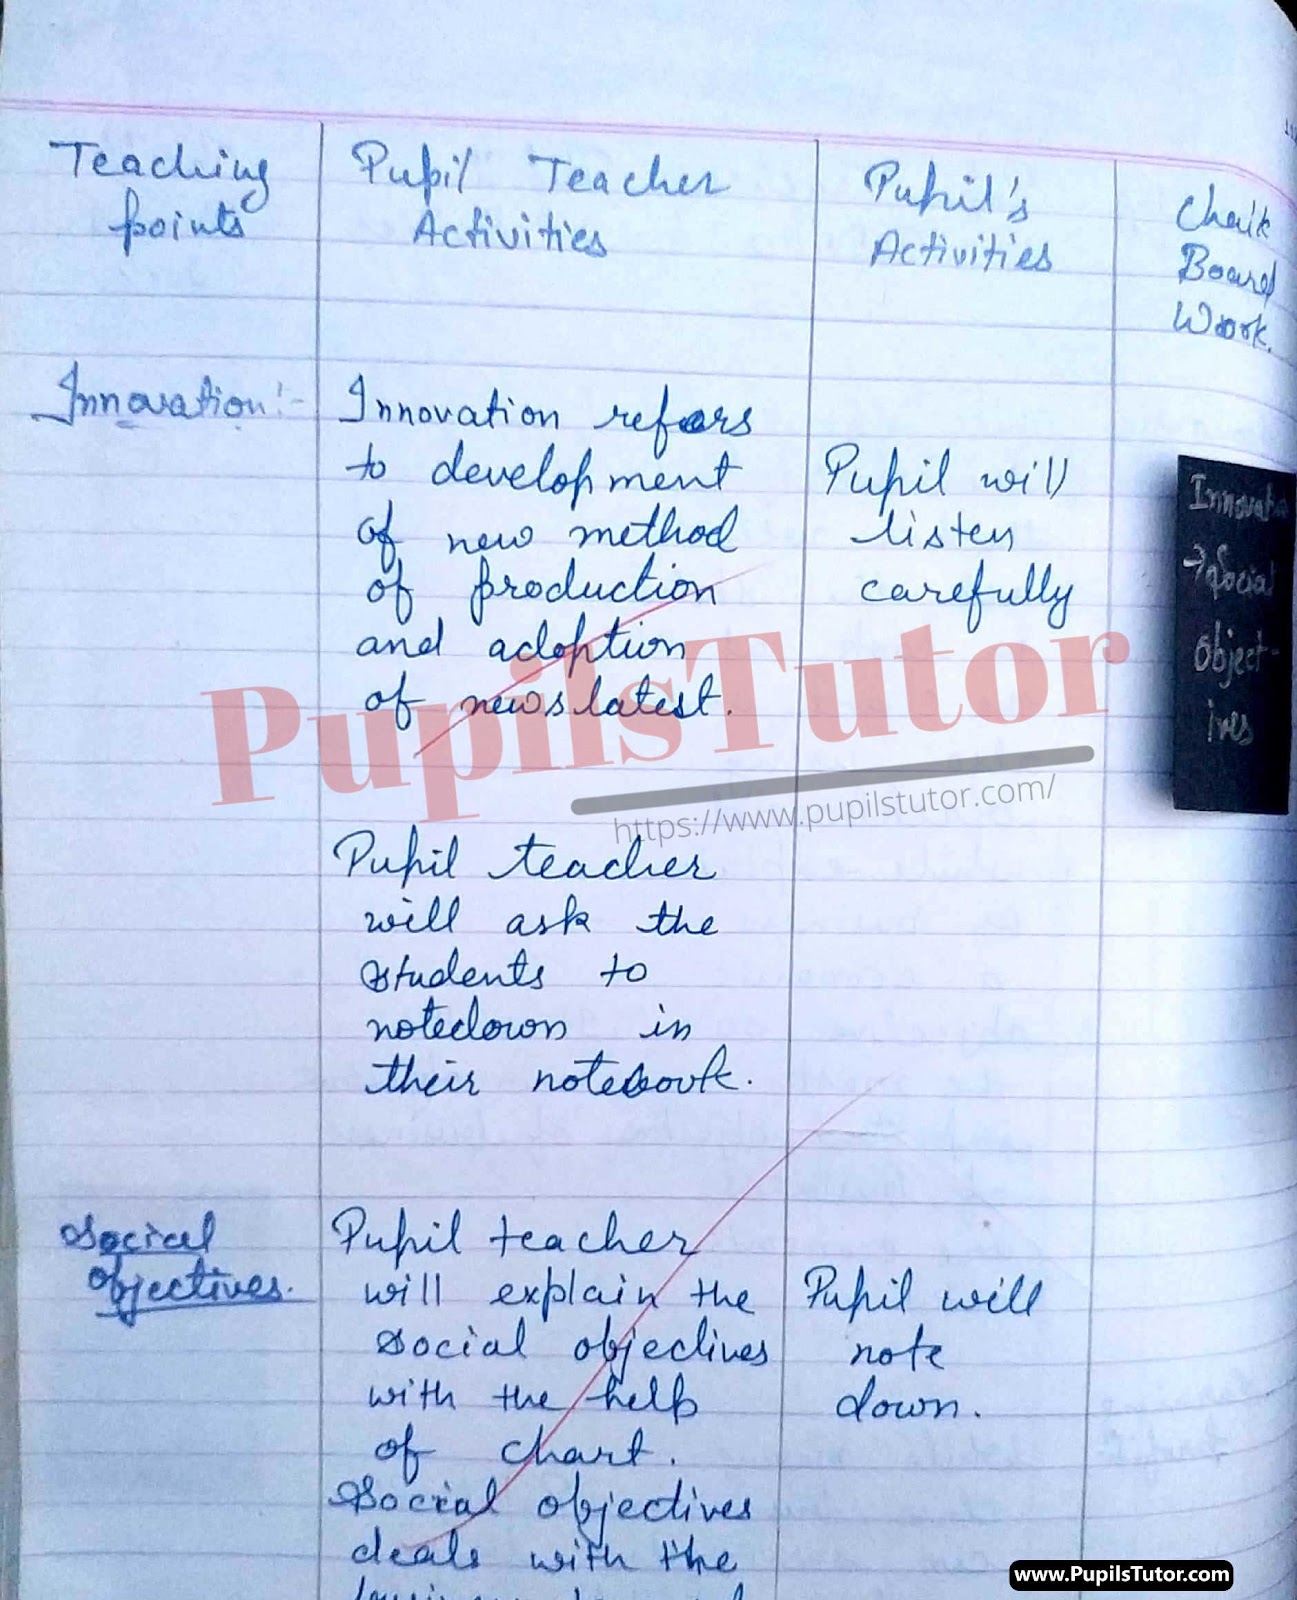 Lesson Plan On Objectives Of Business For Class 11th And 12th.  – [Page And Pic Number 5] – https://www.pupilstutor.com/